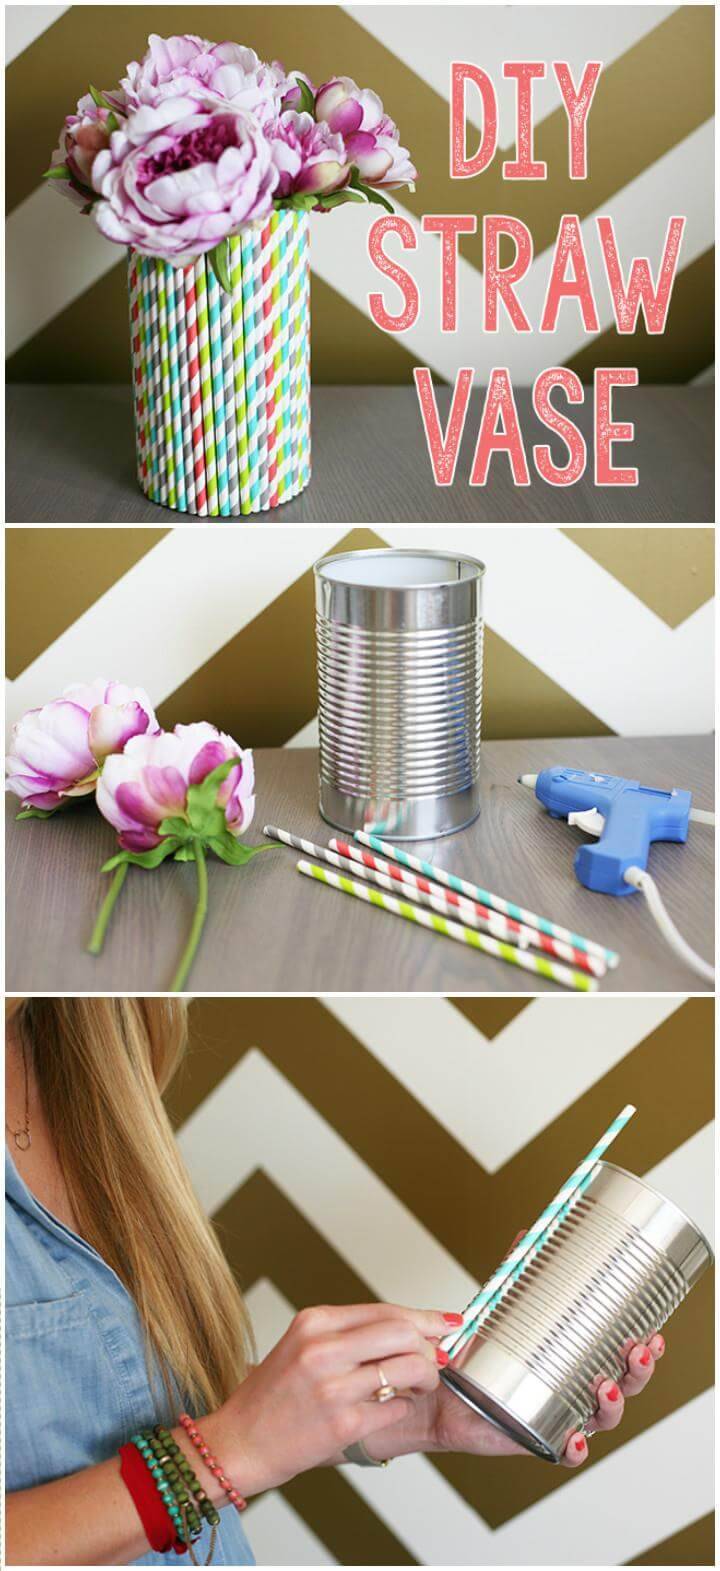 DIY tin can and straw vase